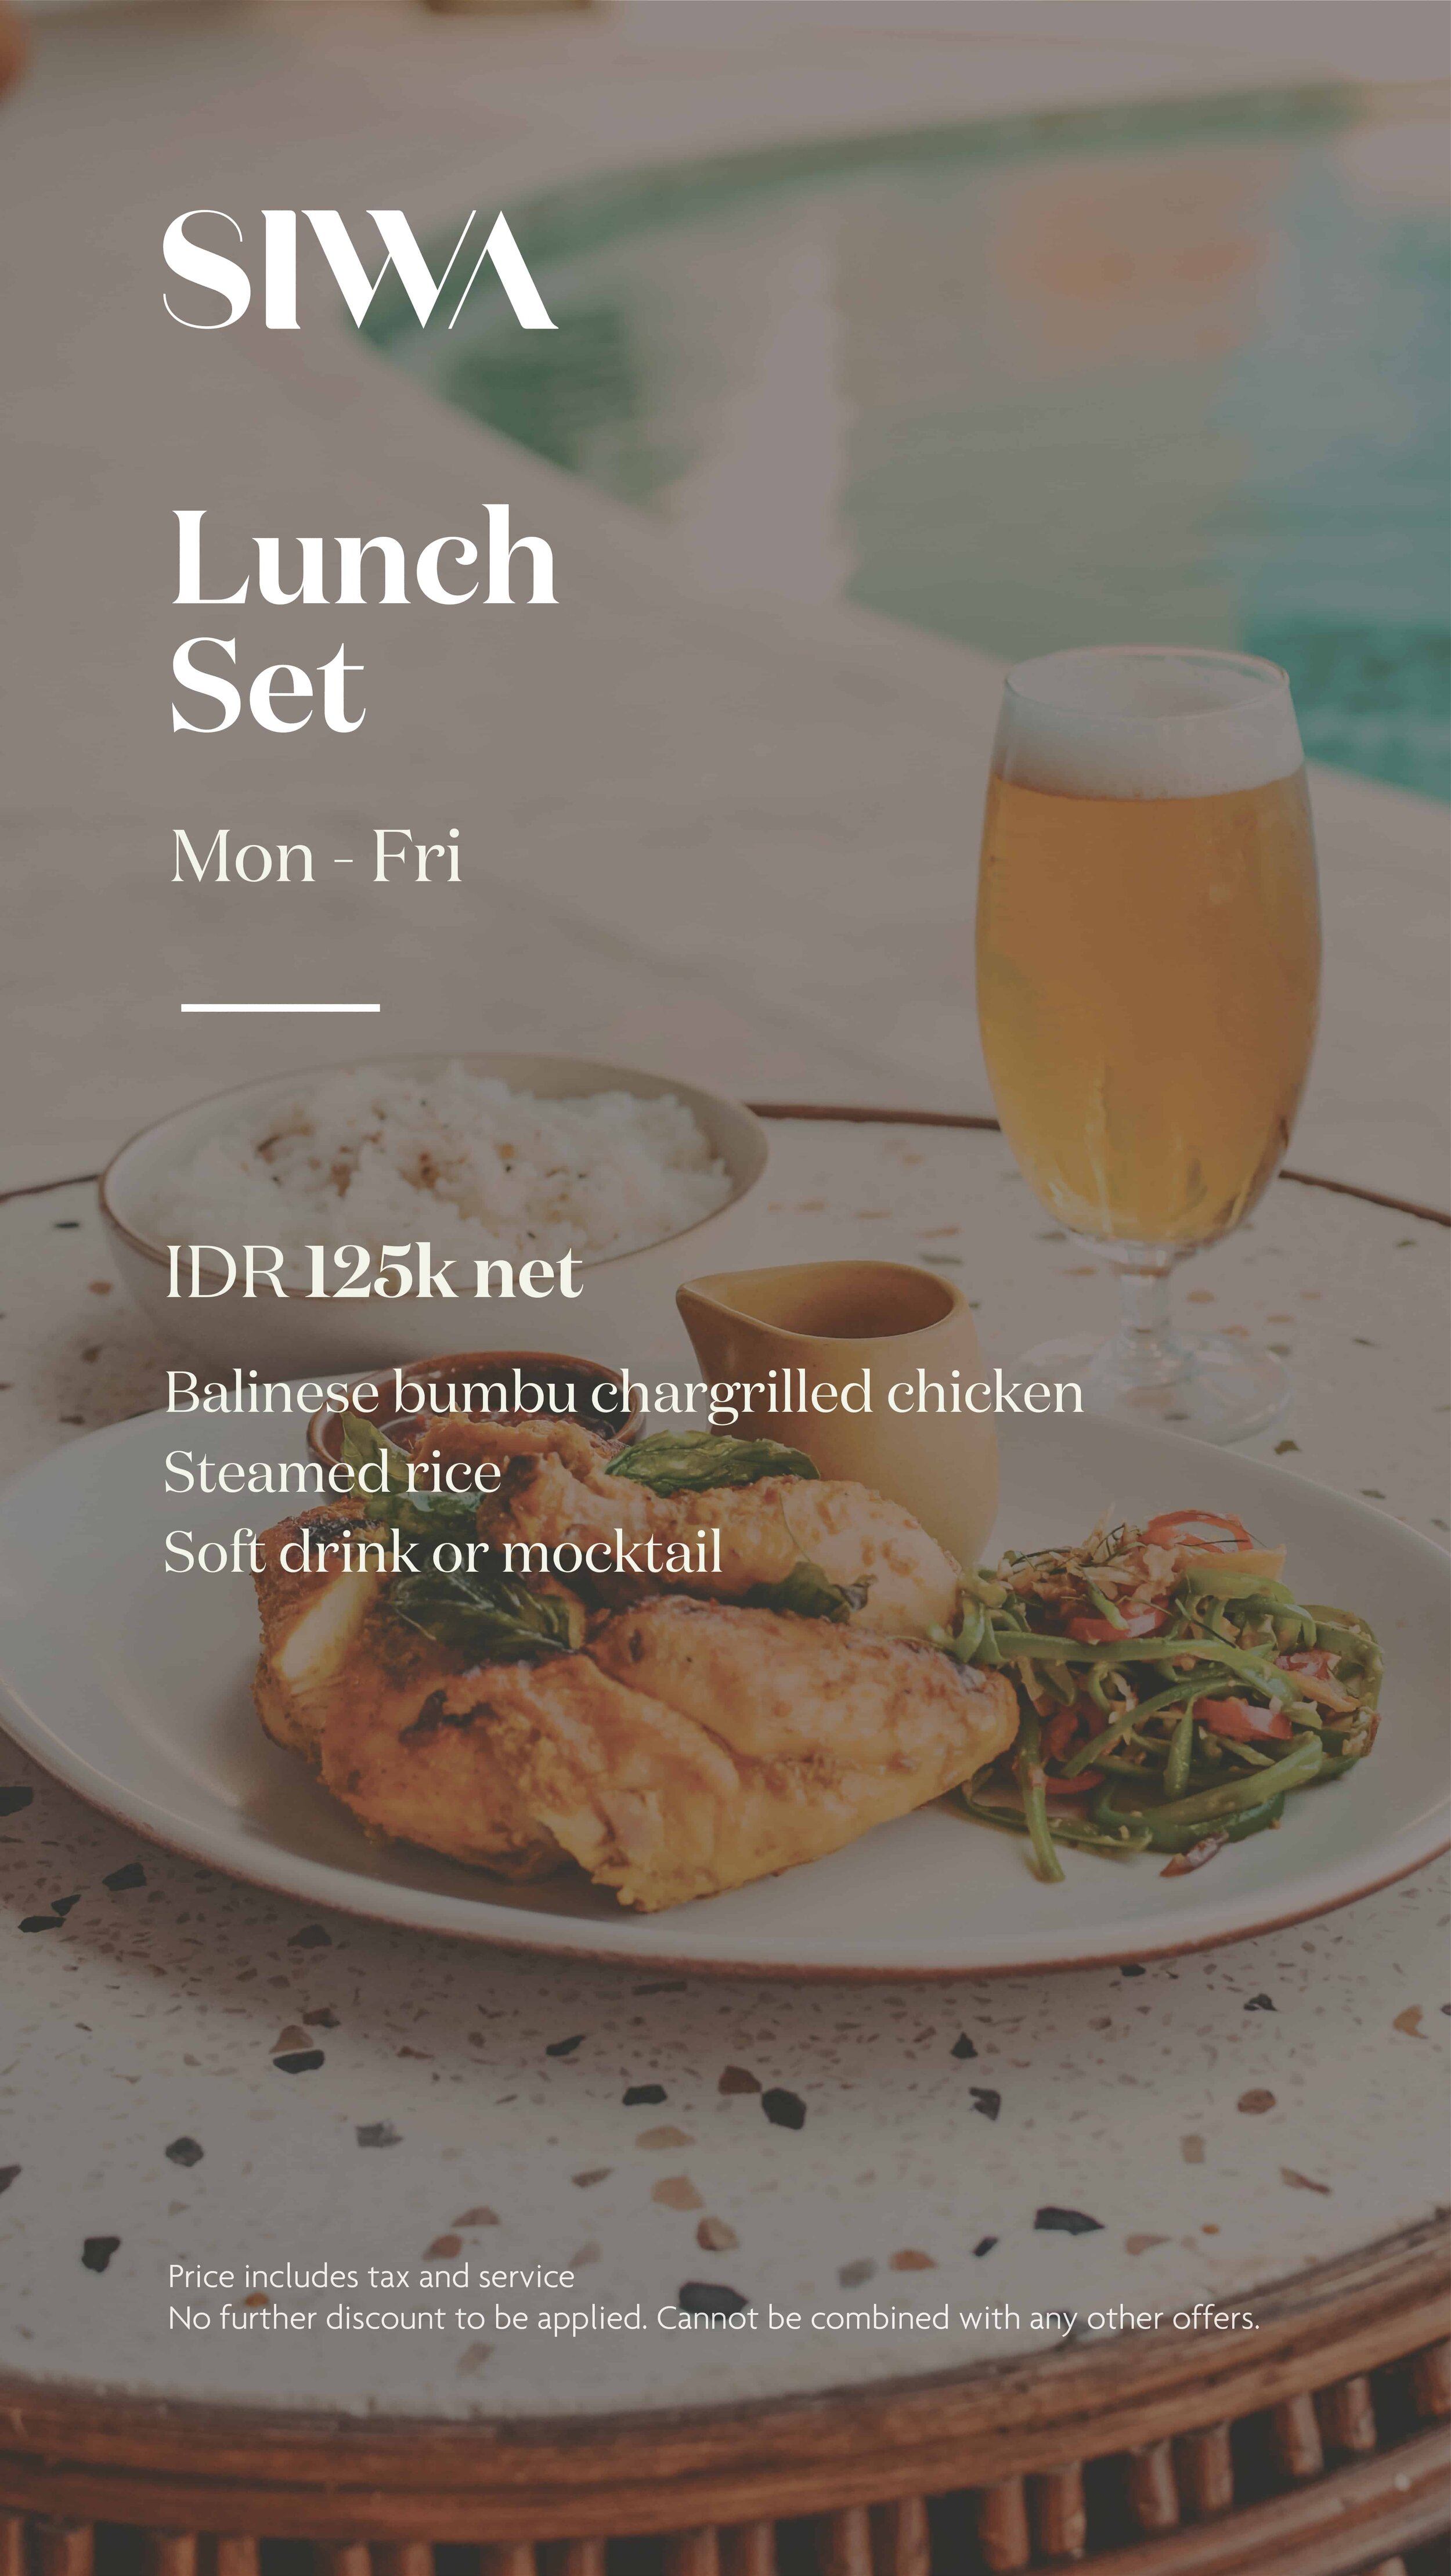 LUNCH SET MENU 2 - MONDAY - FRIDAY •  Balinese Bumbu Chargrilled Chicken• Steamed Rice• Soft drink or mocktailIDR 125K -nett / person